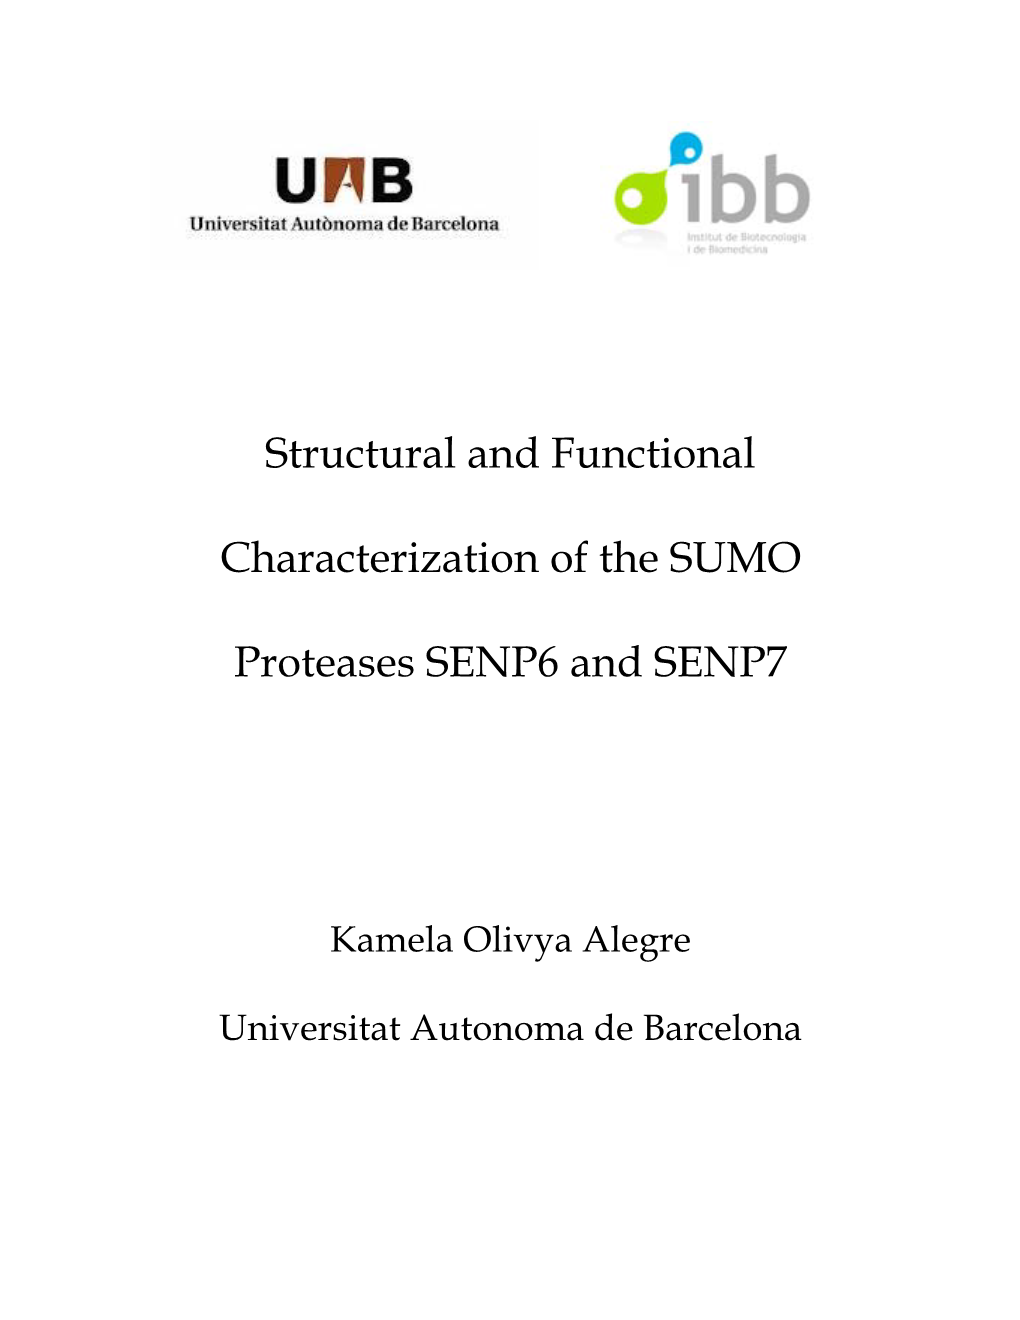 Structural and Functional Characterization of the SUMO